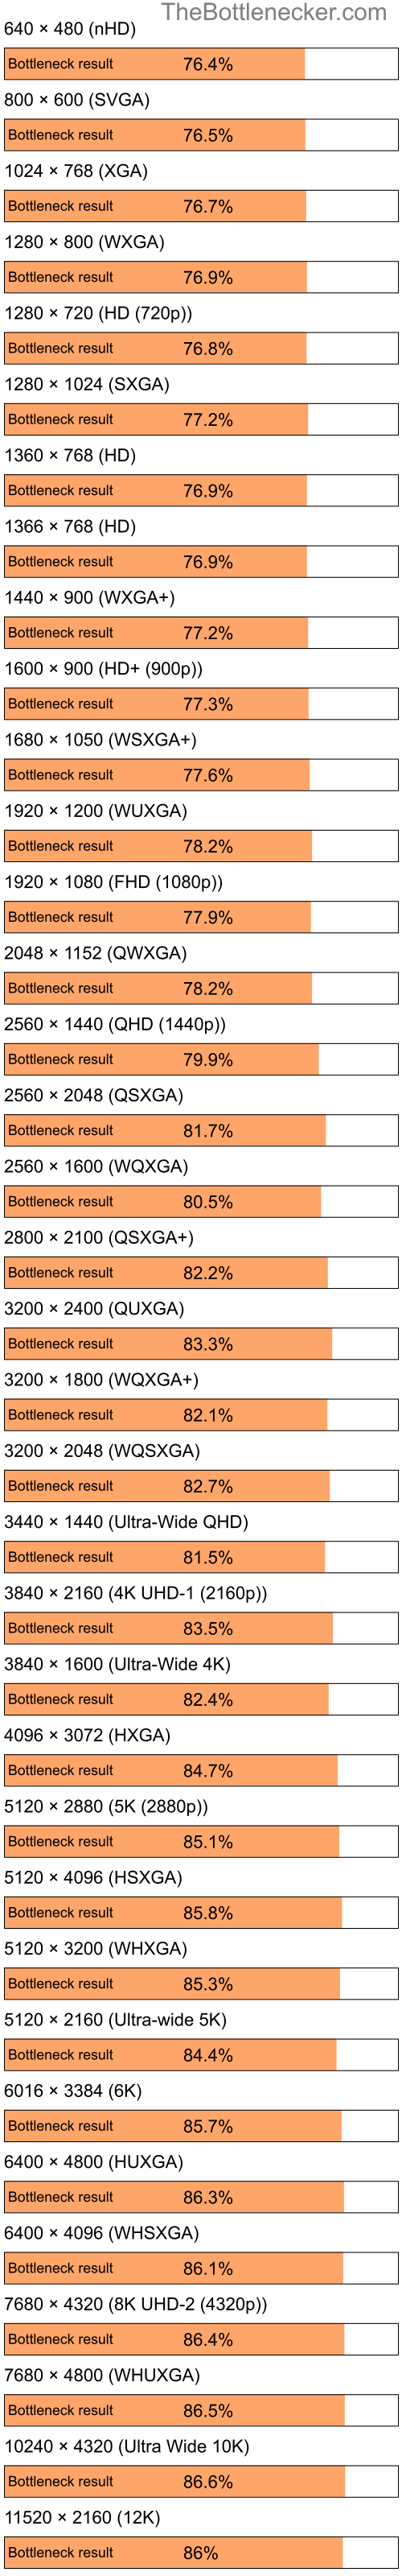 Bottleneck results by resolution for Intel Atom N280 and AMD Mobility Radeon X1400 in7 Days to Die